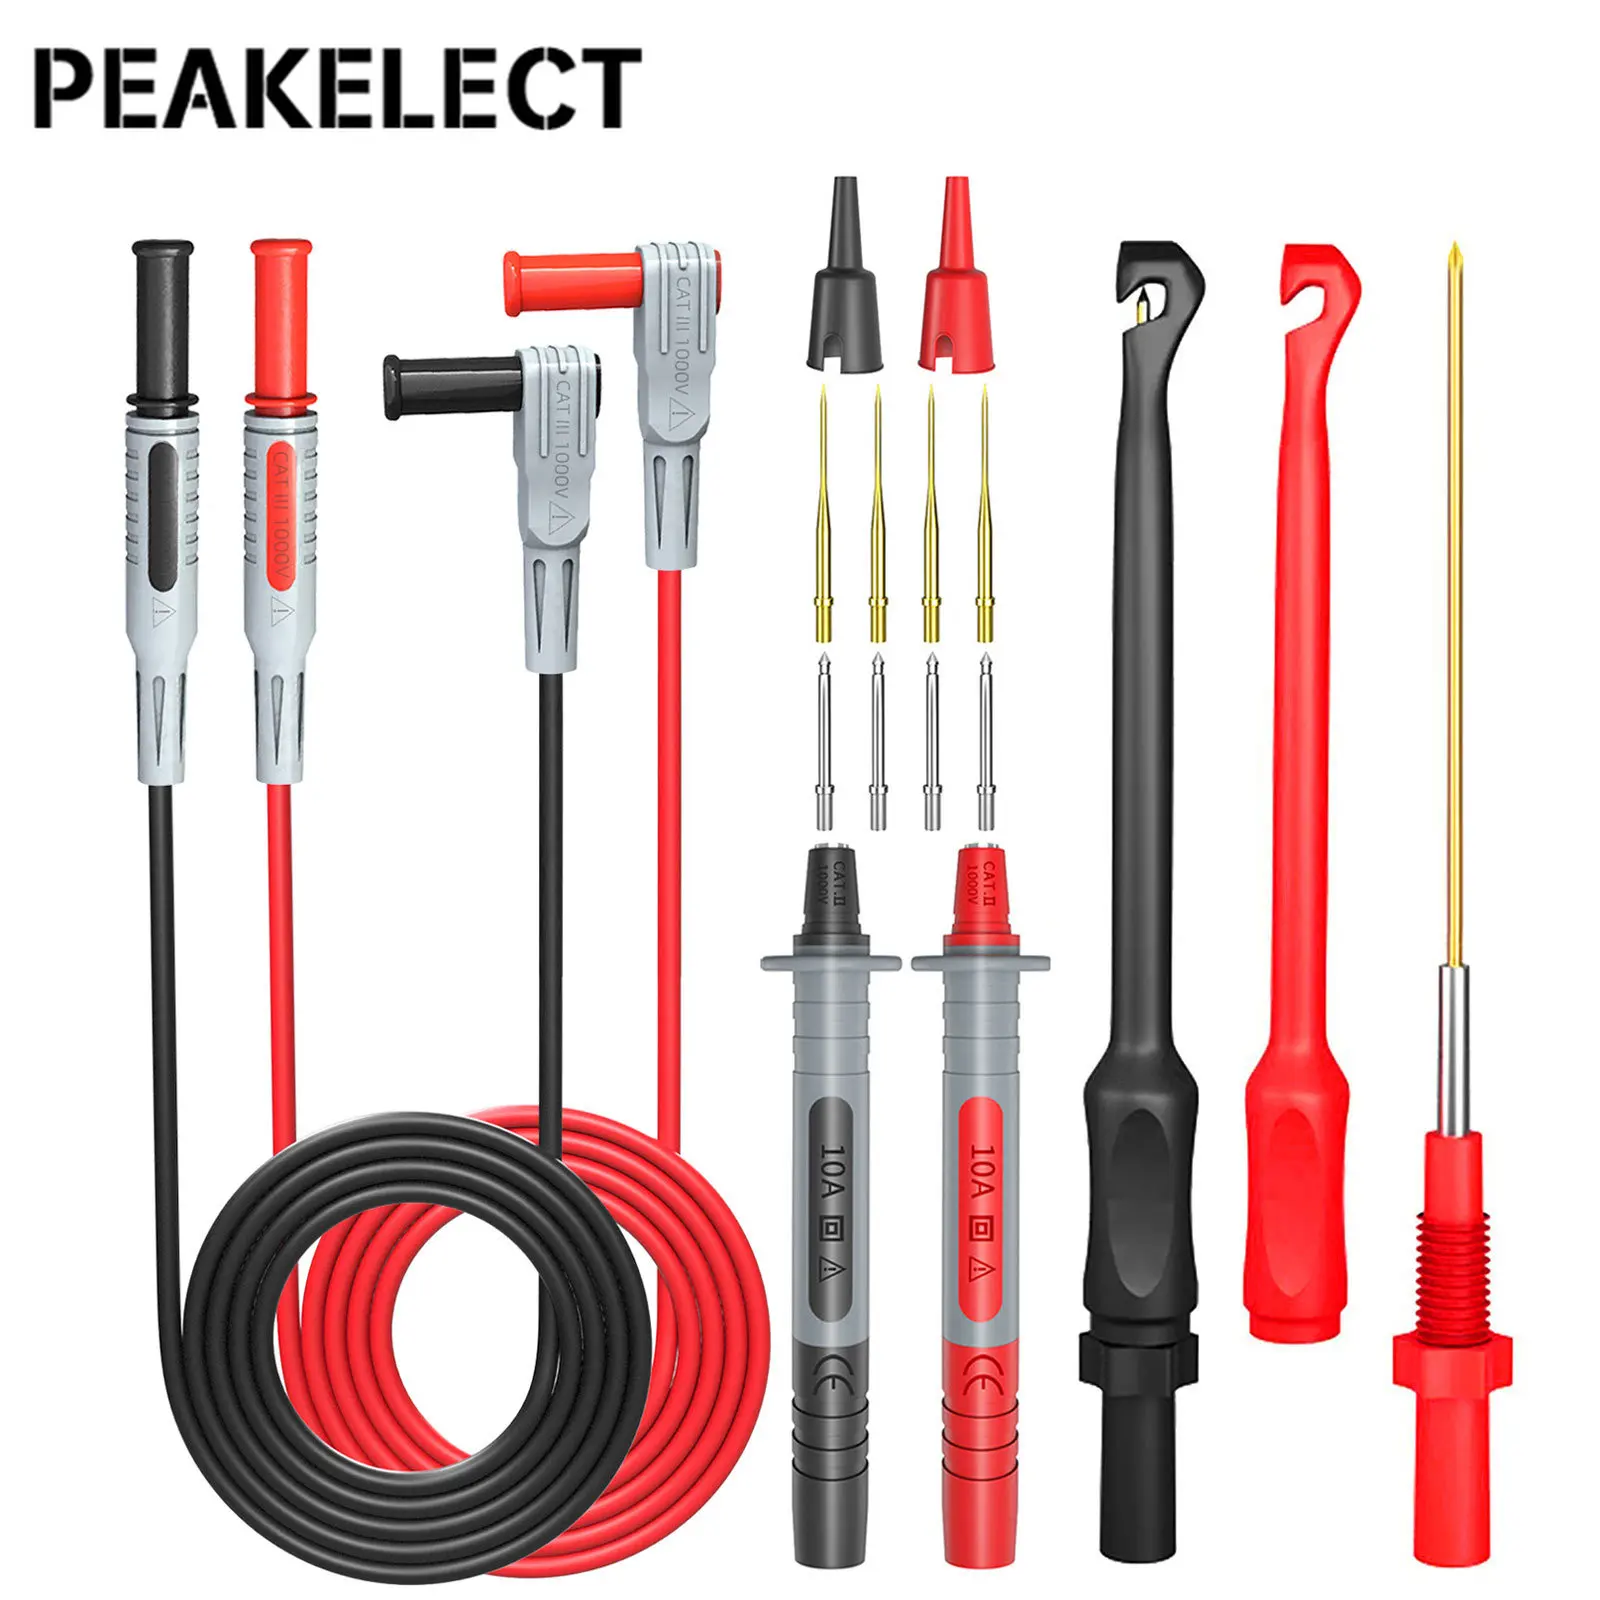 Peakelect P1033B Multimeter Test Probes Leads Kit with Wire Piercing Puncture 4mm Banana Plug Test Leads Test Probes 1 pair of test banana plug multimeter probes electrical test probe wire pen banana plug connector